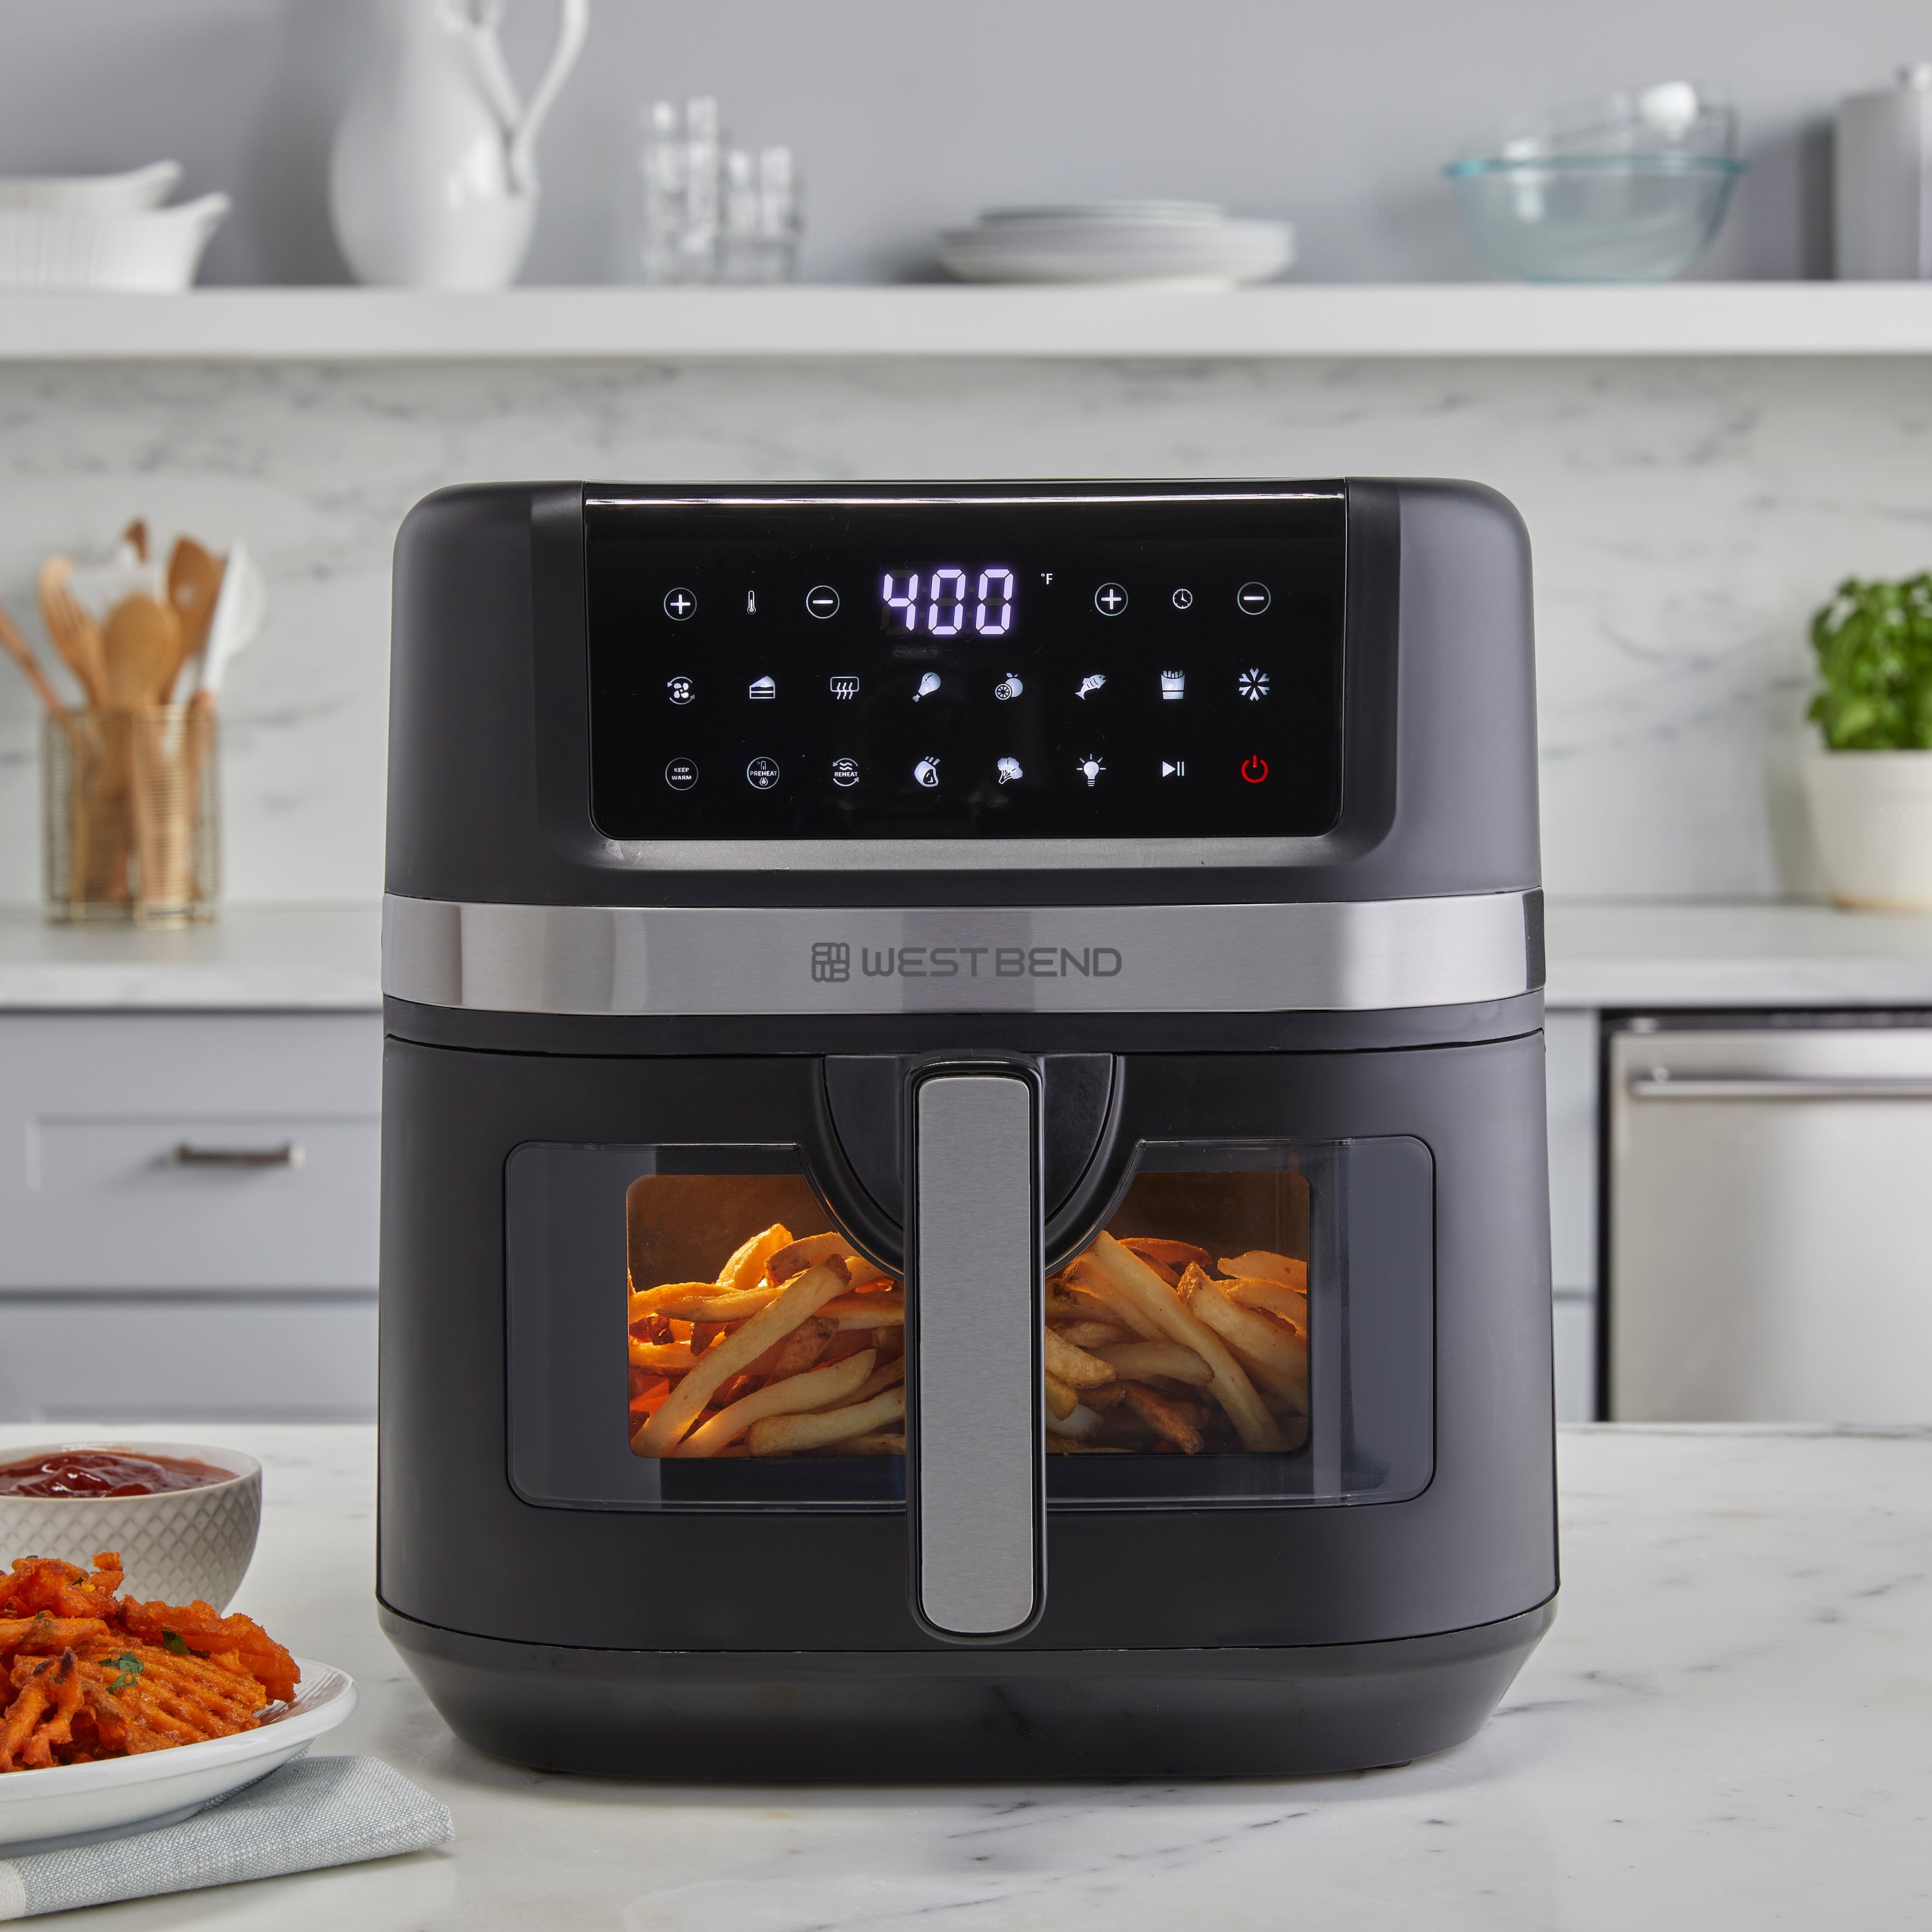 West Bend 7QT Air Fryer with 13 One-Touch Presets, in Black (AFWB7QBK13)